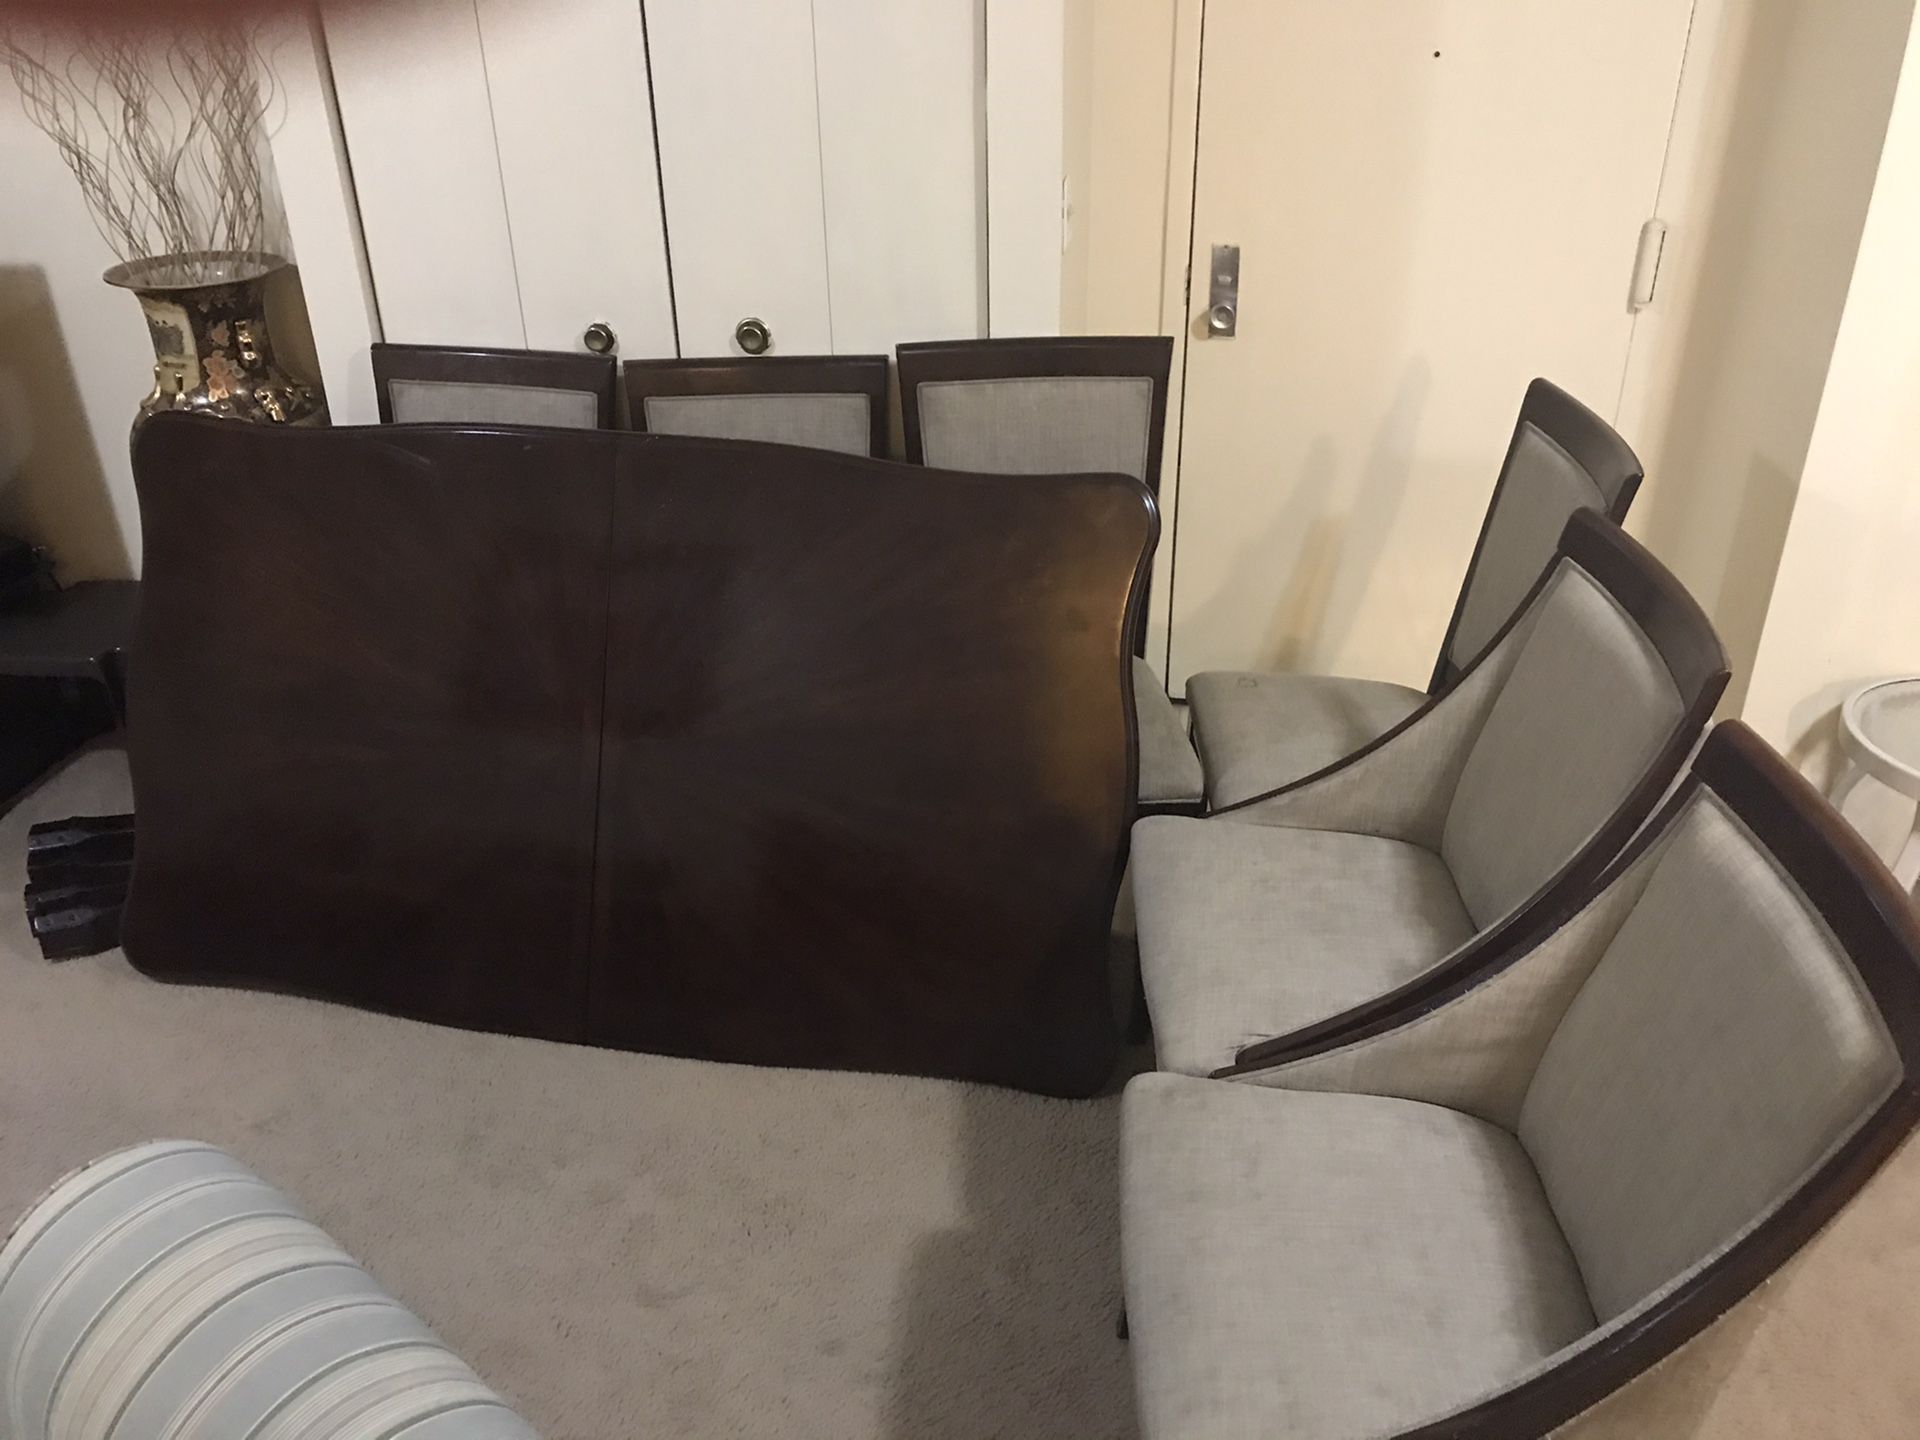 Dining table with 6 chairs still available for pick up in Gaithersburg md20877